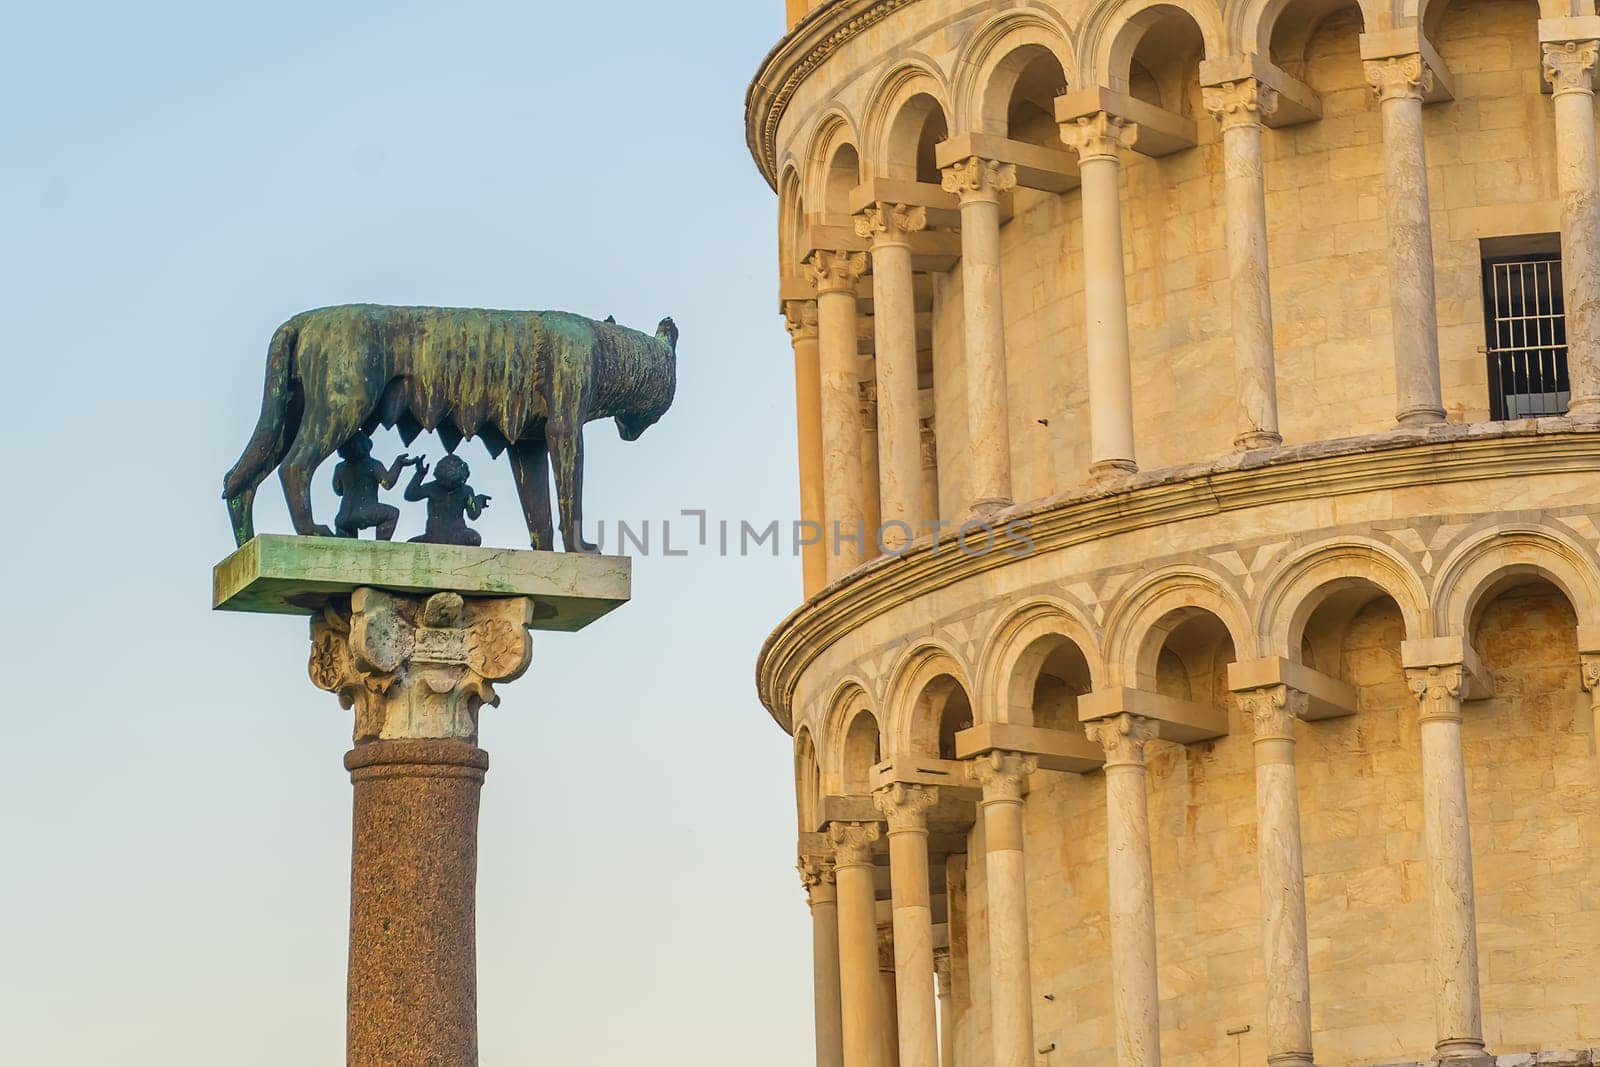 The Capitoline Wolf or Lupa Capitolina is a bronze sculpture near the Pisa Leaning Tower